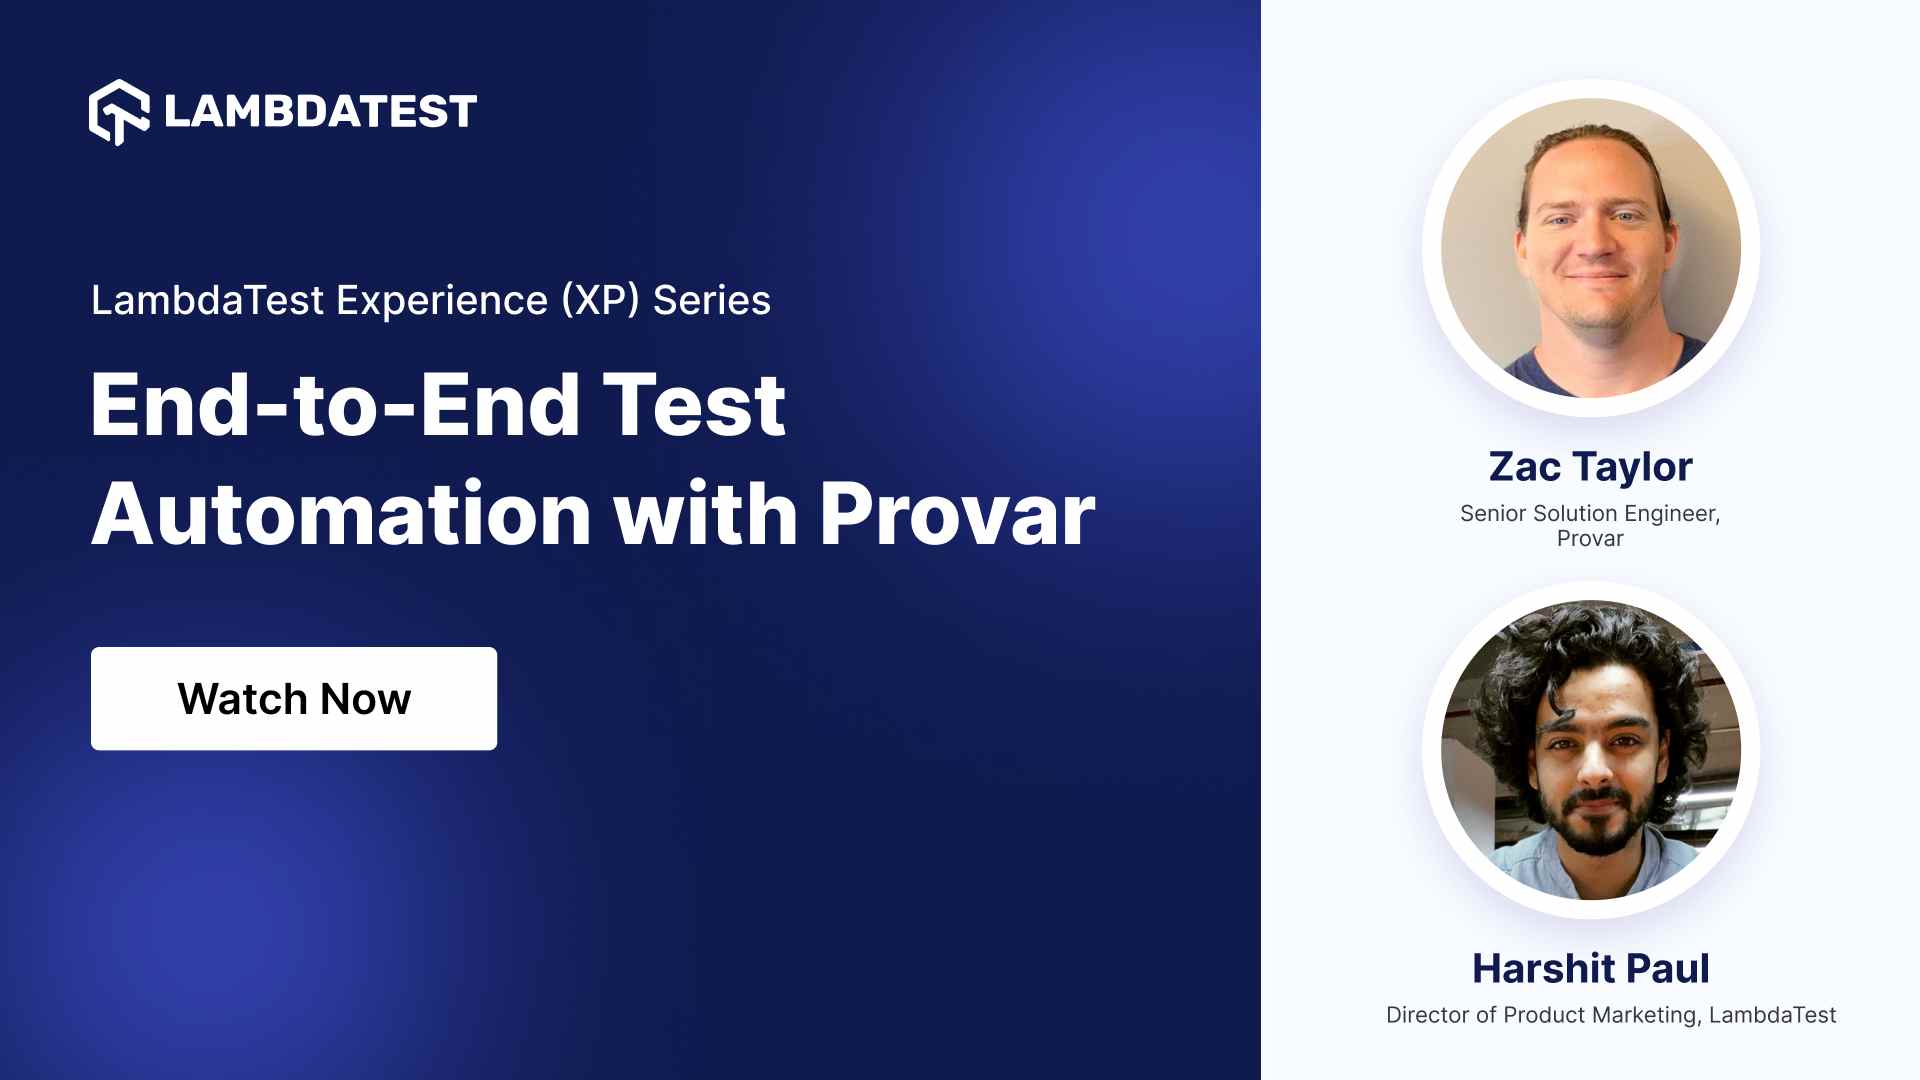 End-to-End Test Automation with Provar